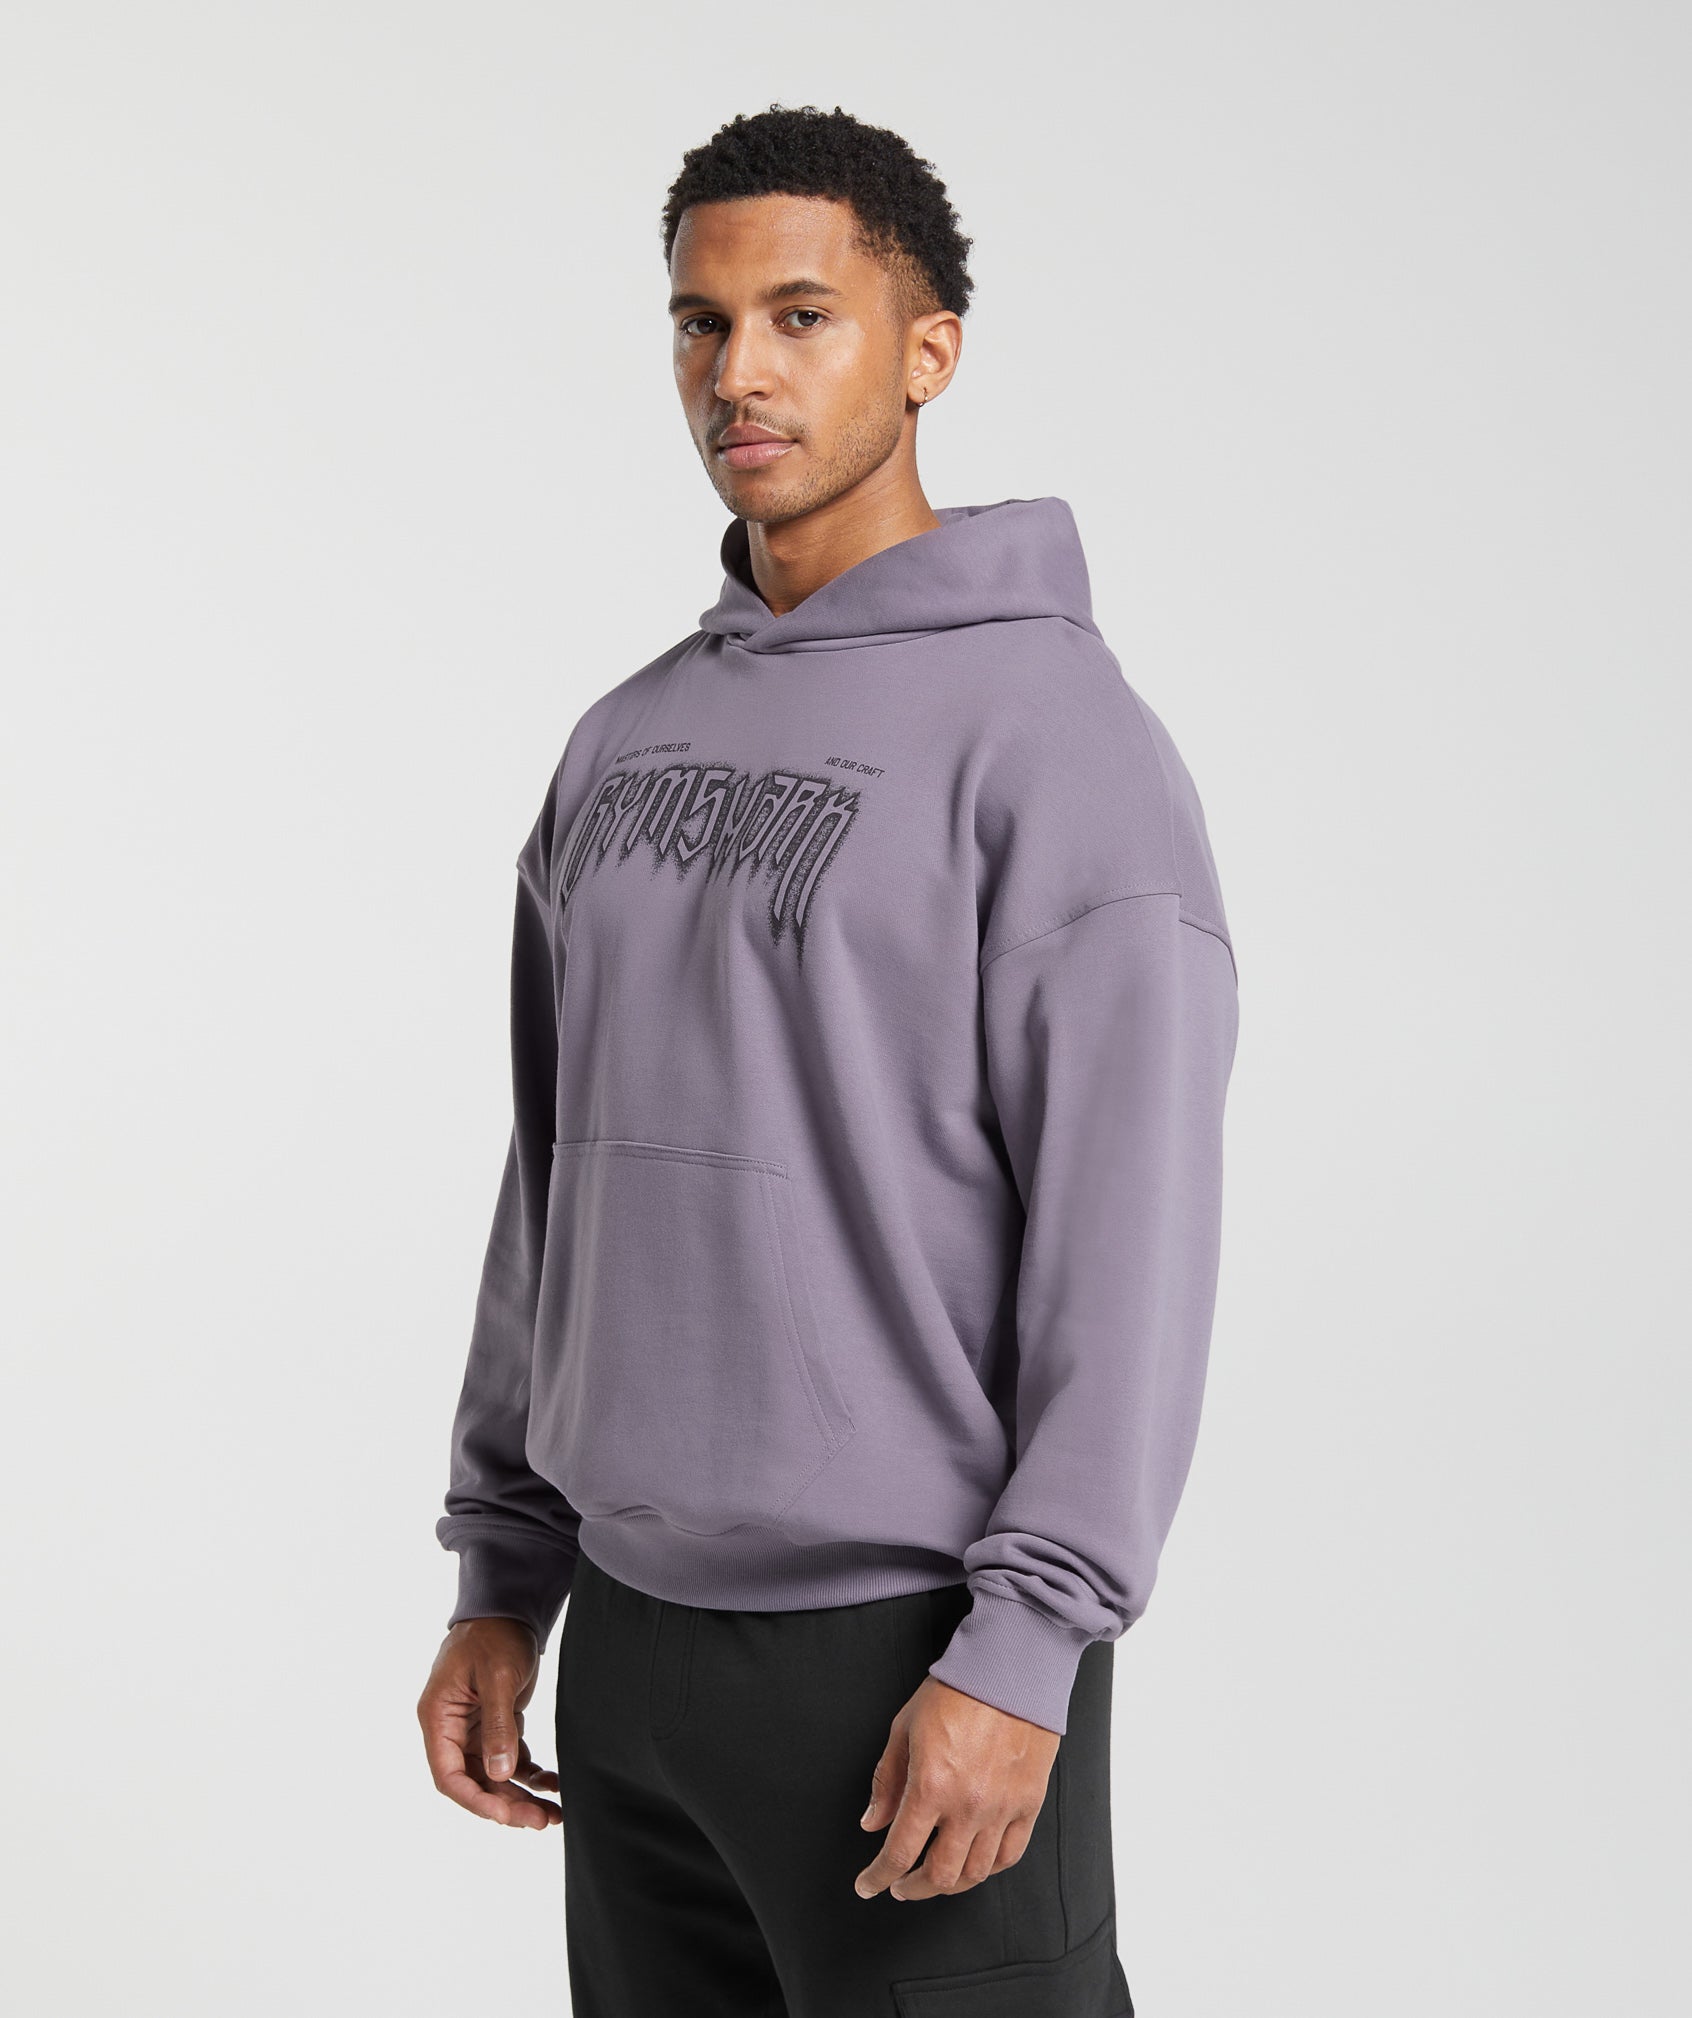 Masters of Our Craft Hoodie in Fog Purple - view 3